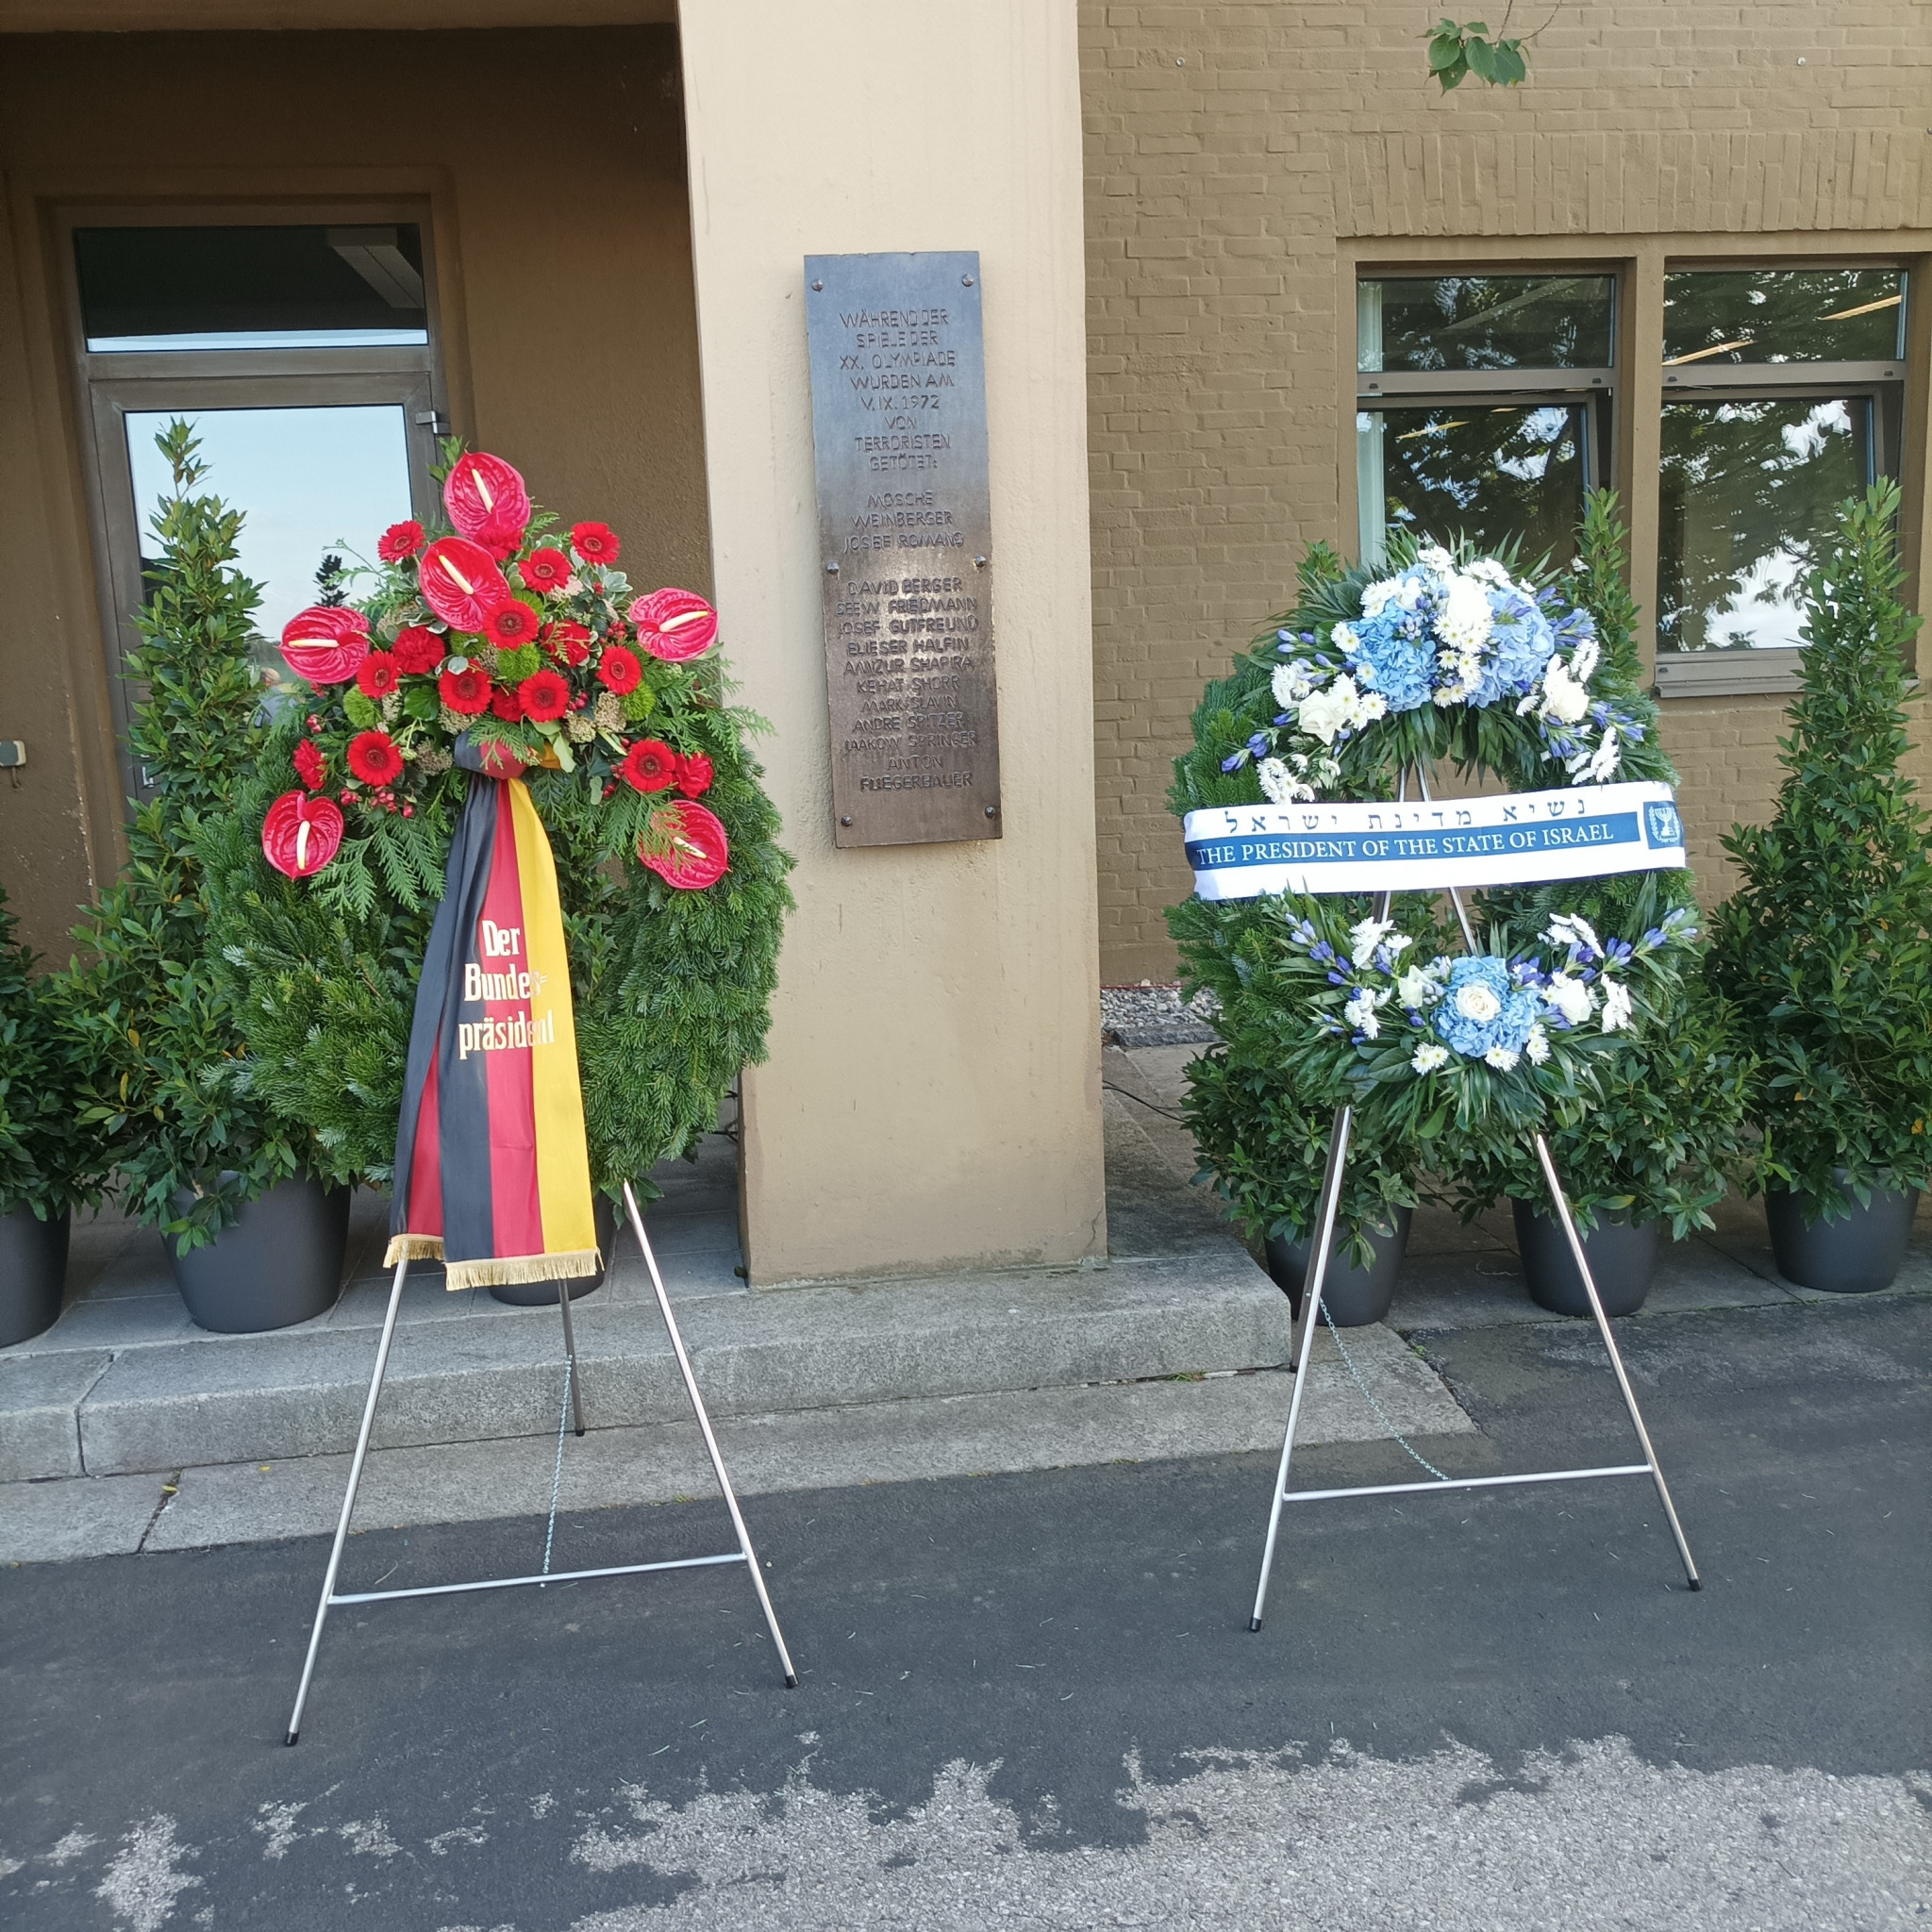 Floral tributes close to the Furstenfeldbruck Airport control tower, close to where the unsuccessful rescue of the Israeli hostages was attempted ©ITG